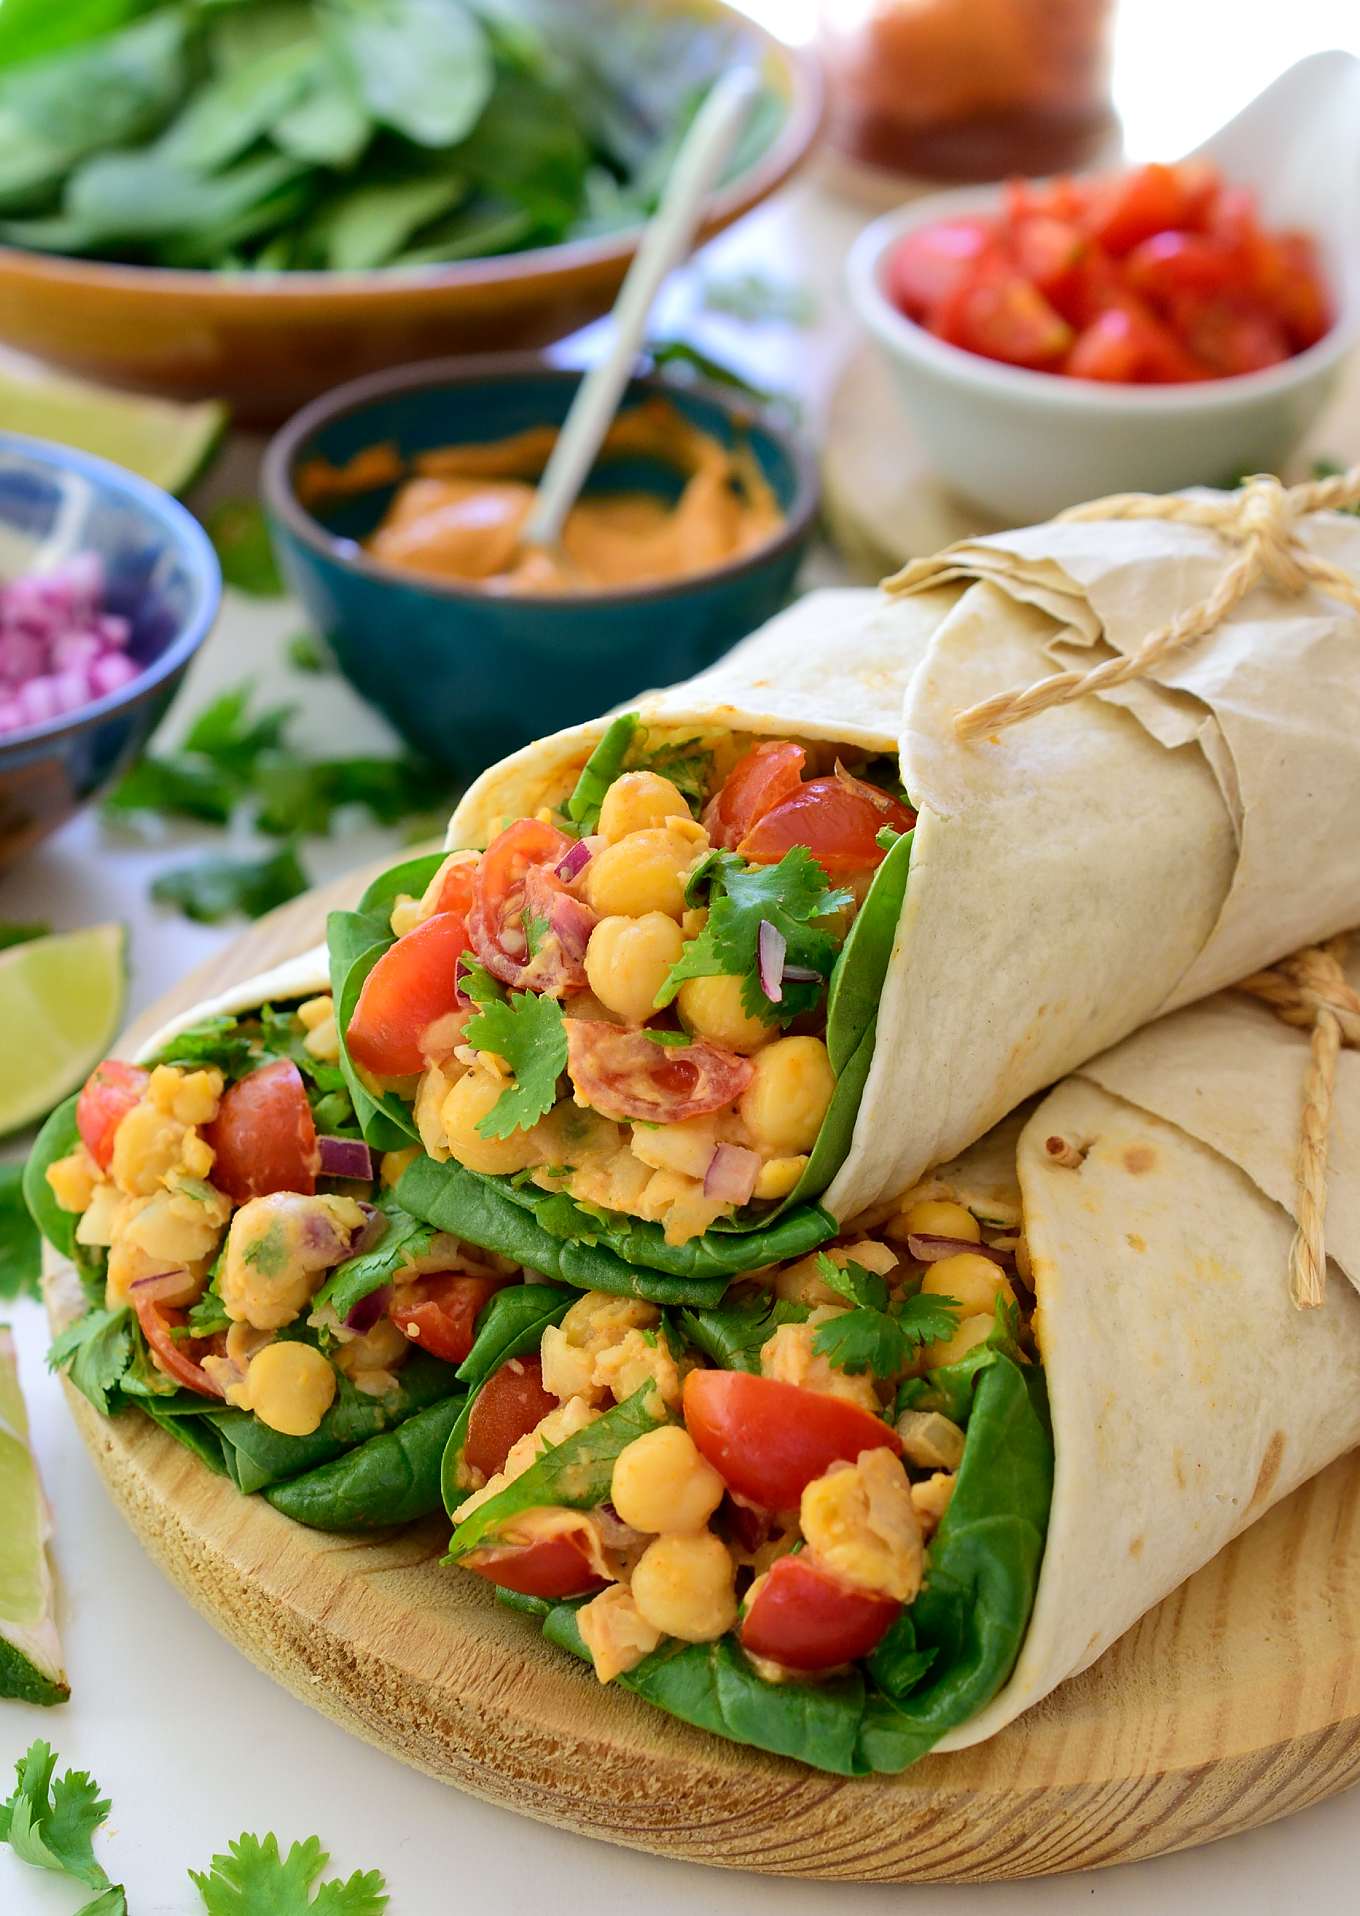 Vegan tacos with chickpeas are a super quick, easy and tasty taco recipe for lunch or dinner. Protein-packed chickpeas, juicy cherry tomatoes and fresh cilantro combine on a bed of crispy baby spinach leaves to make a simple and healthy taco filling. No need for waste, use the chickpea water to make a smoky vegan aquafaba mayonnaise flavoured with smoked paprika, cumin and lime. You’ll have these vegan tacos on the table and ready to eat in only 15 minutes!